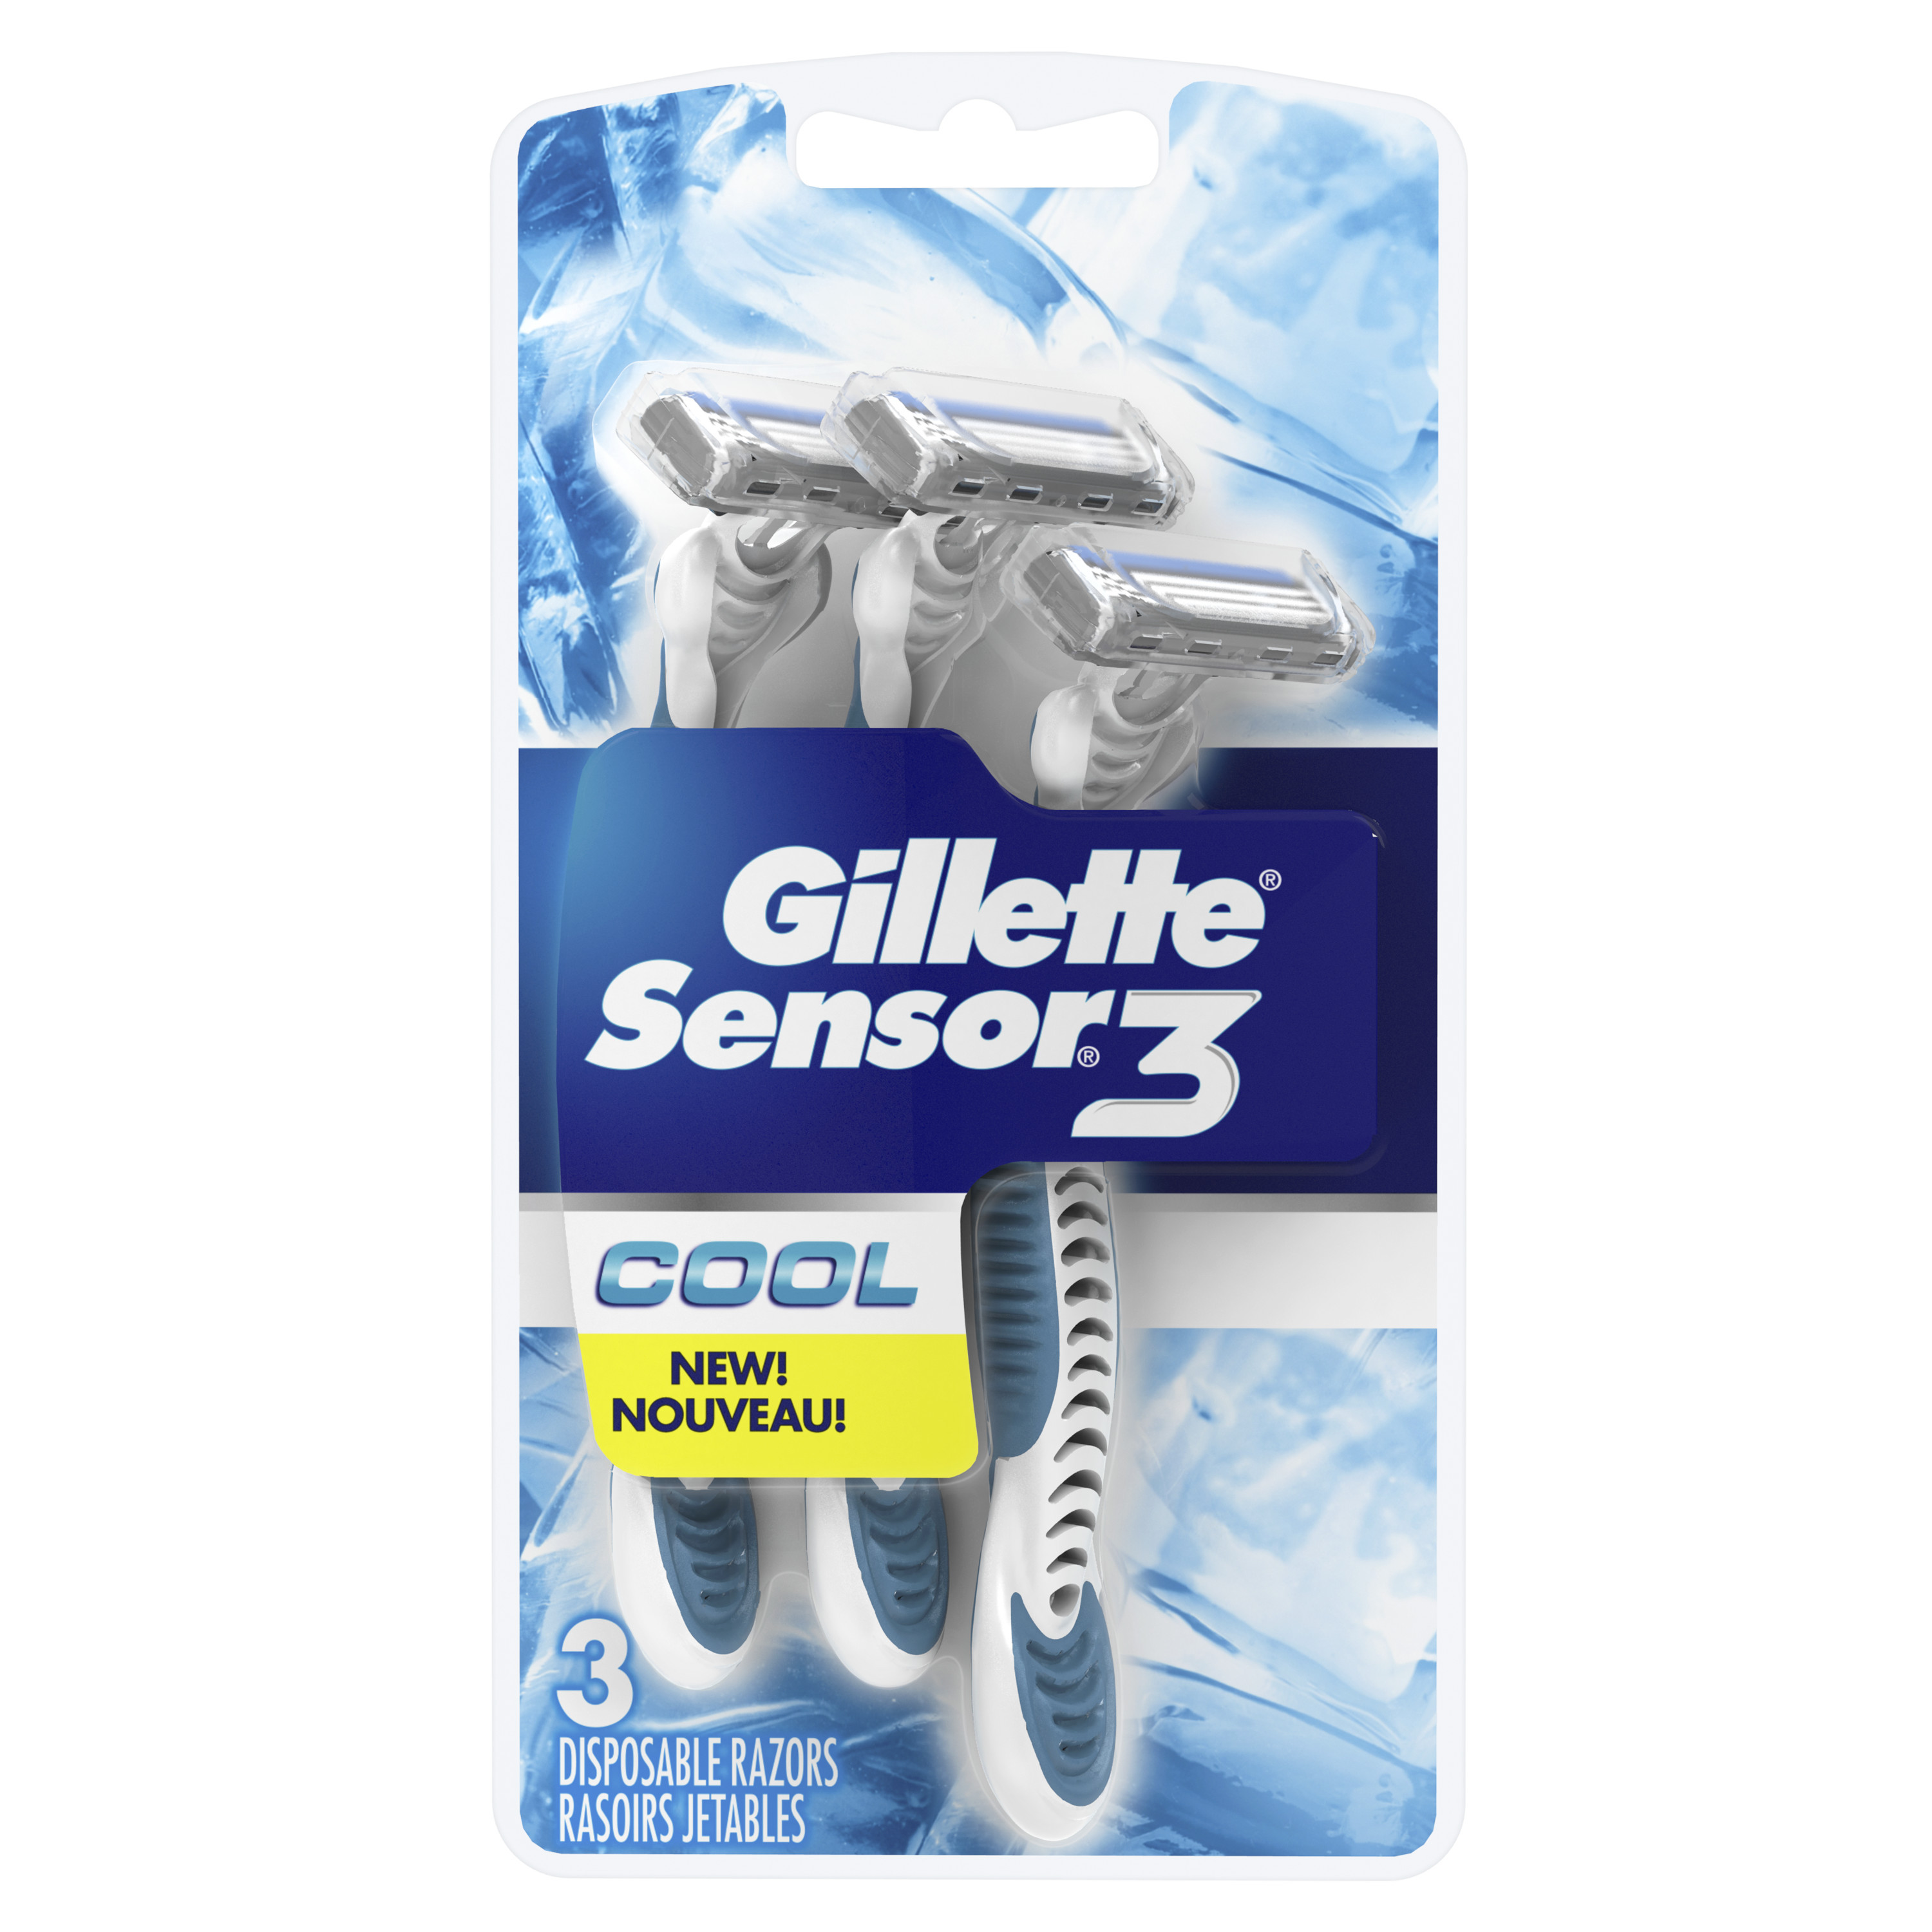 Gillette launches new MACH3 START With Aqua-Grip handle